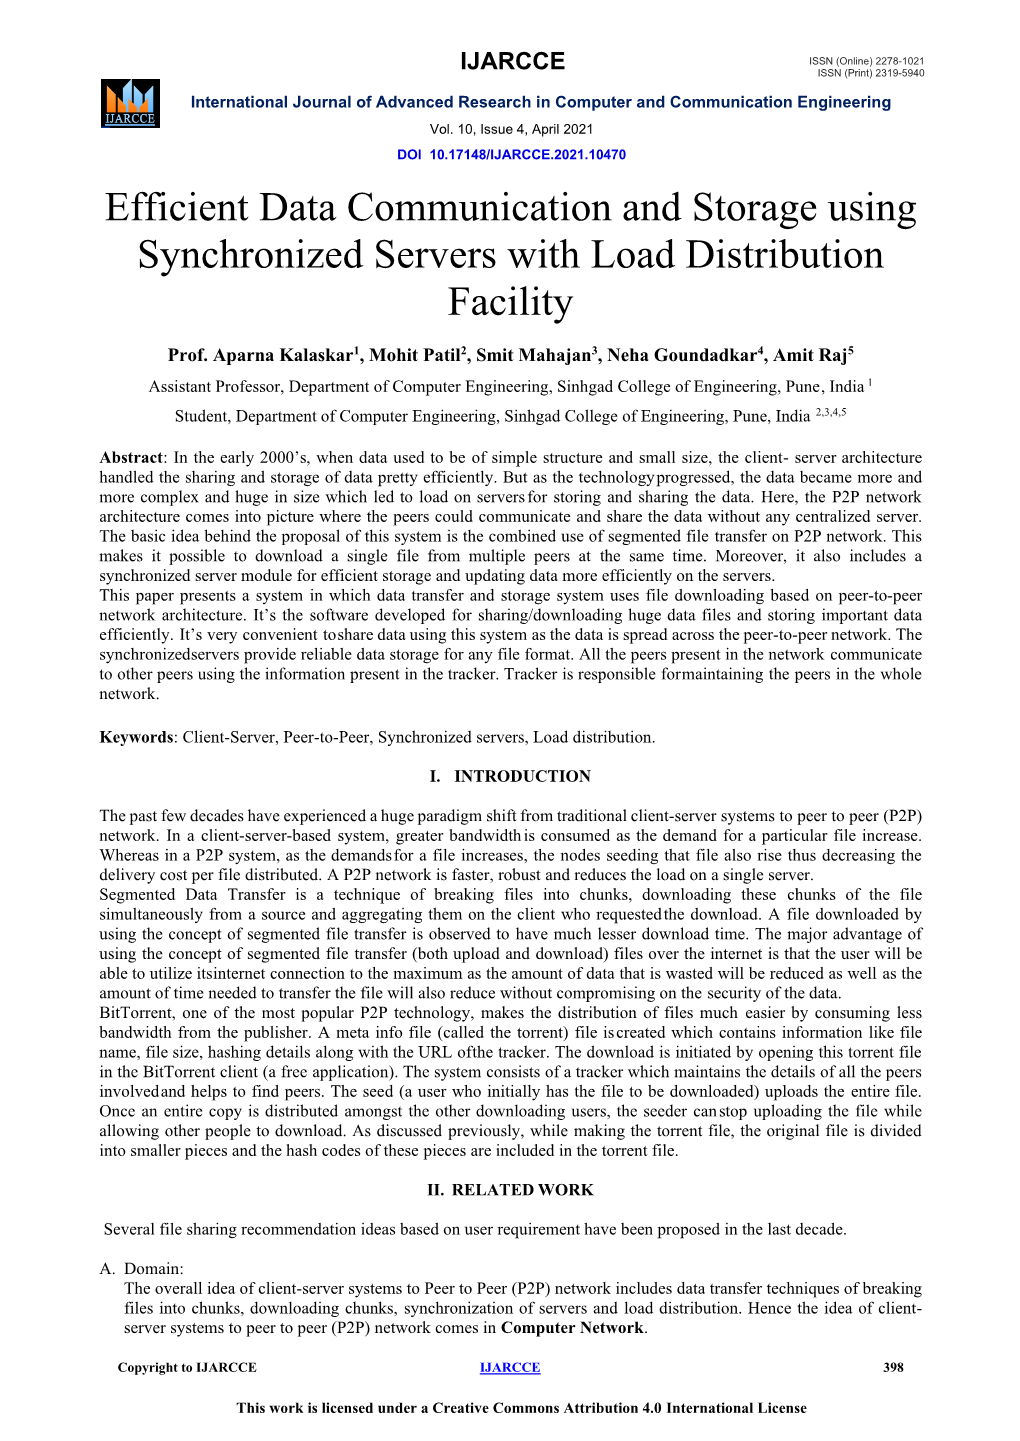 Efficient Data Communication and Storage Using Synchronized Servers with Load Distribution Facility